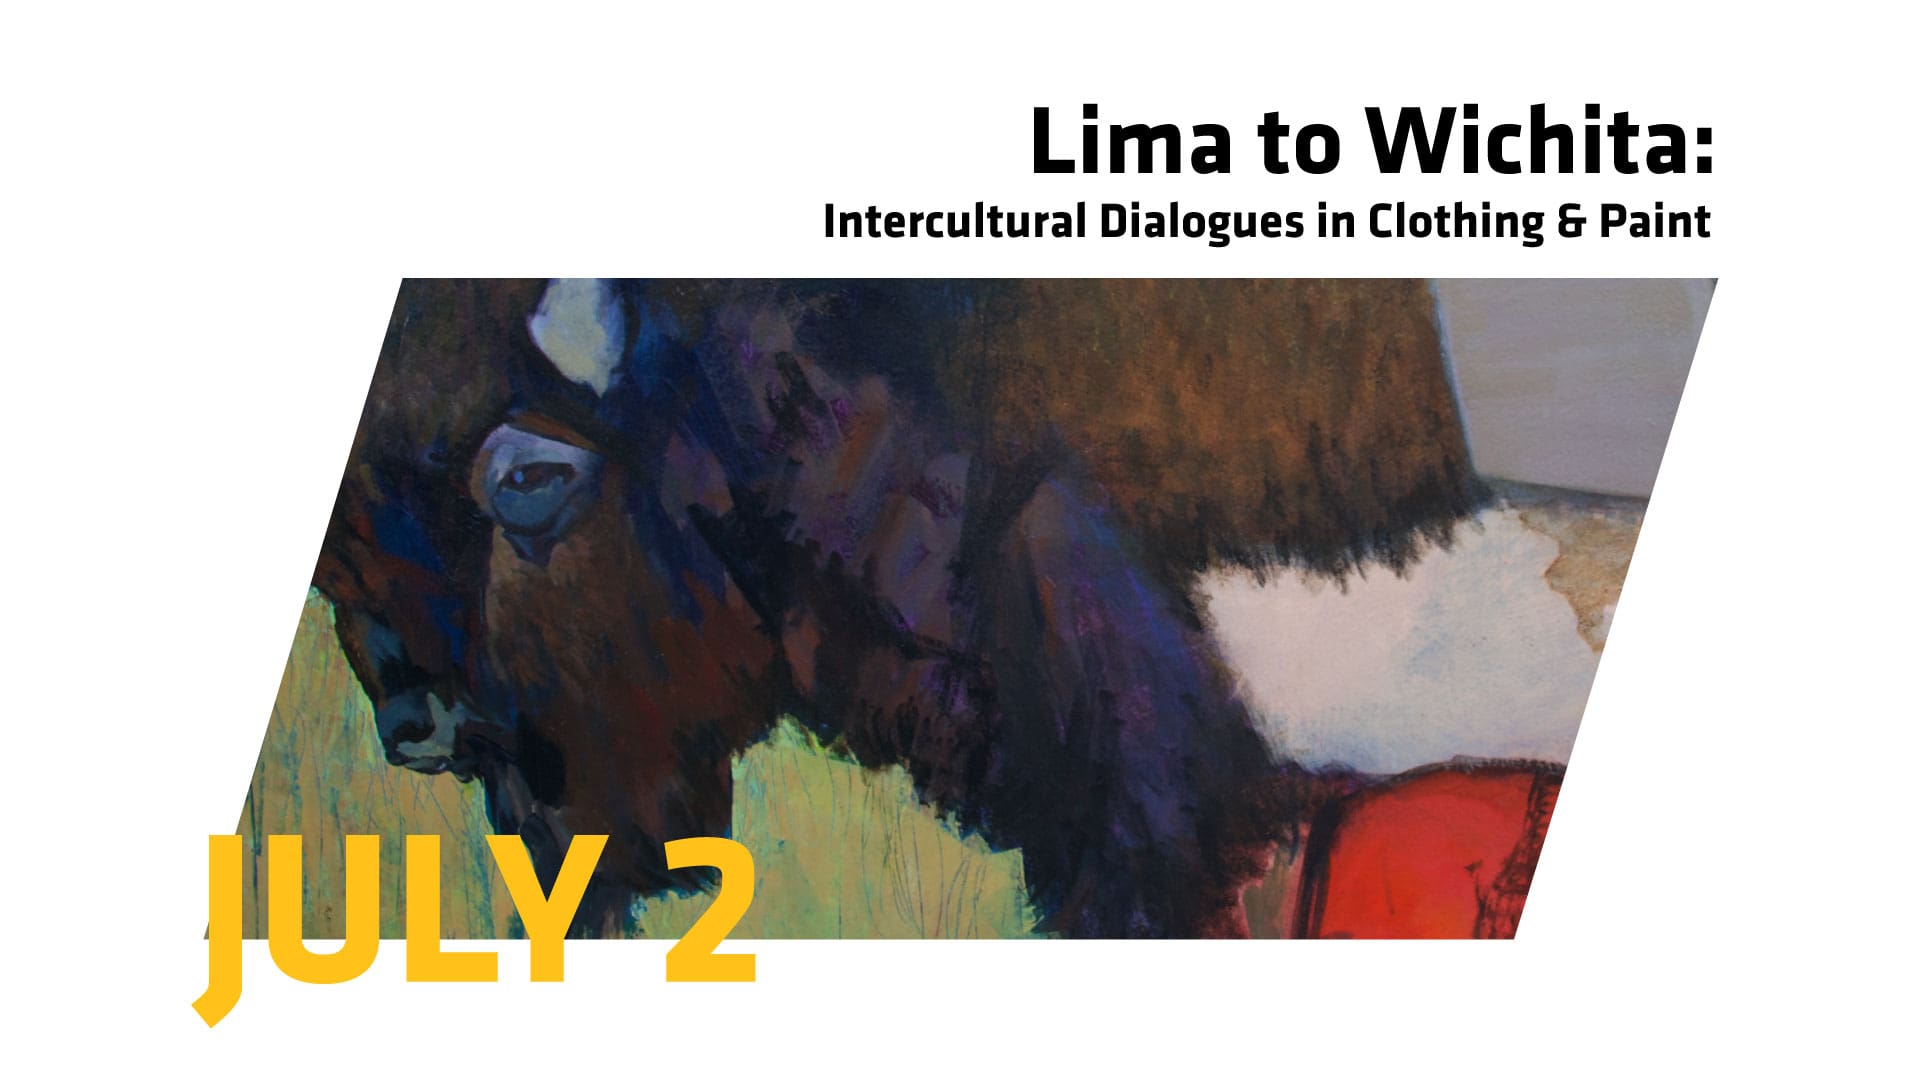 This image includes a detail of a painting of a bison with the words "Lima to Wichita: Intercultural Dialogues in Clothing & Paint" and "July 2."